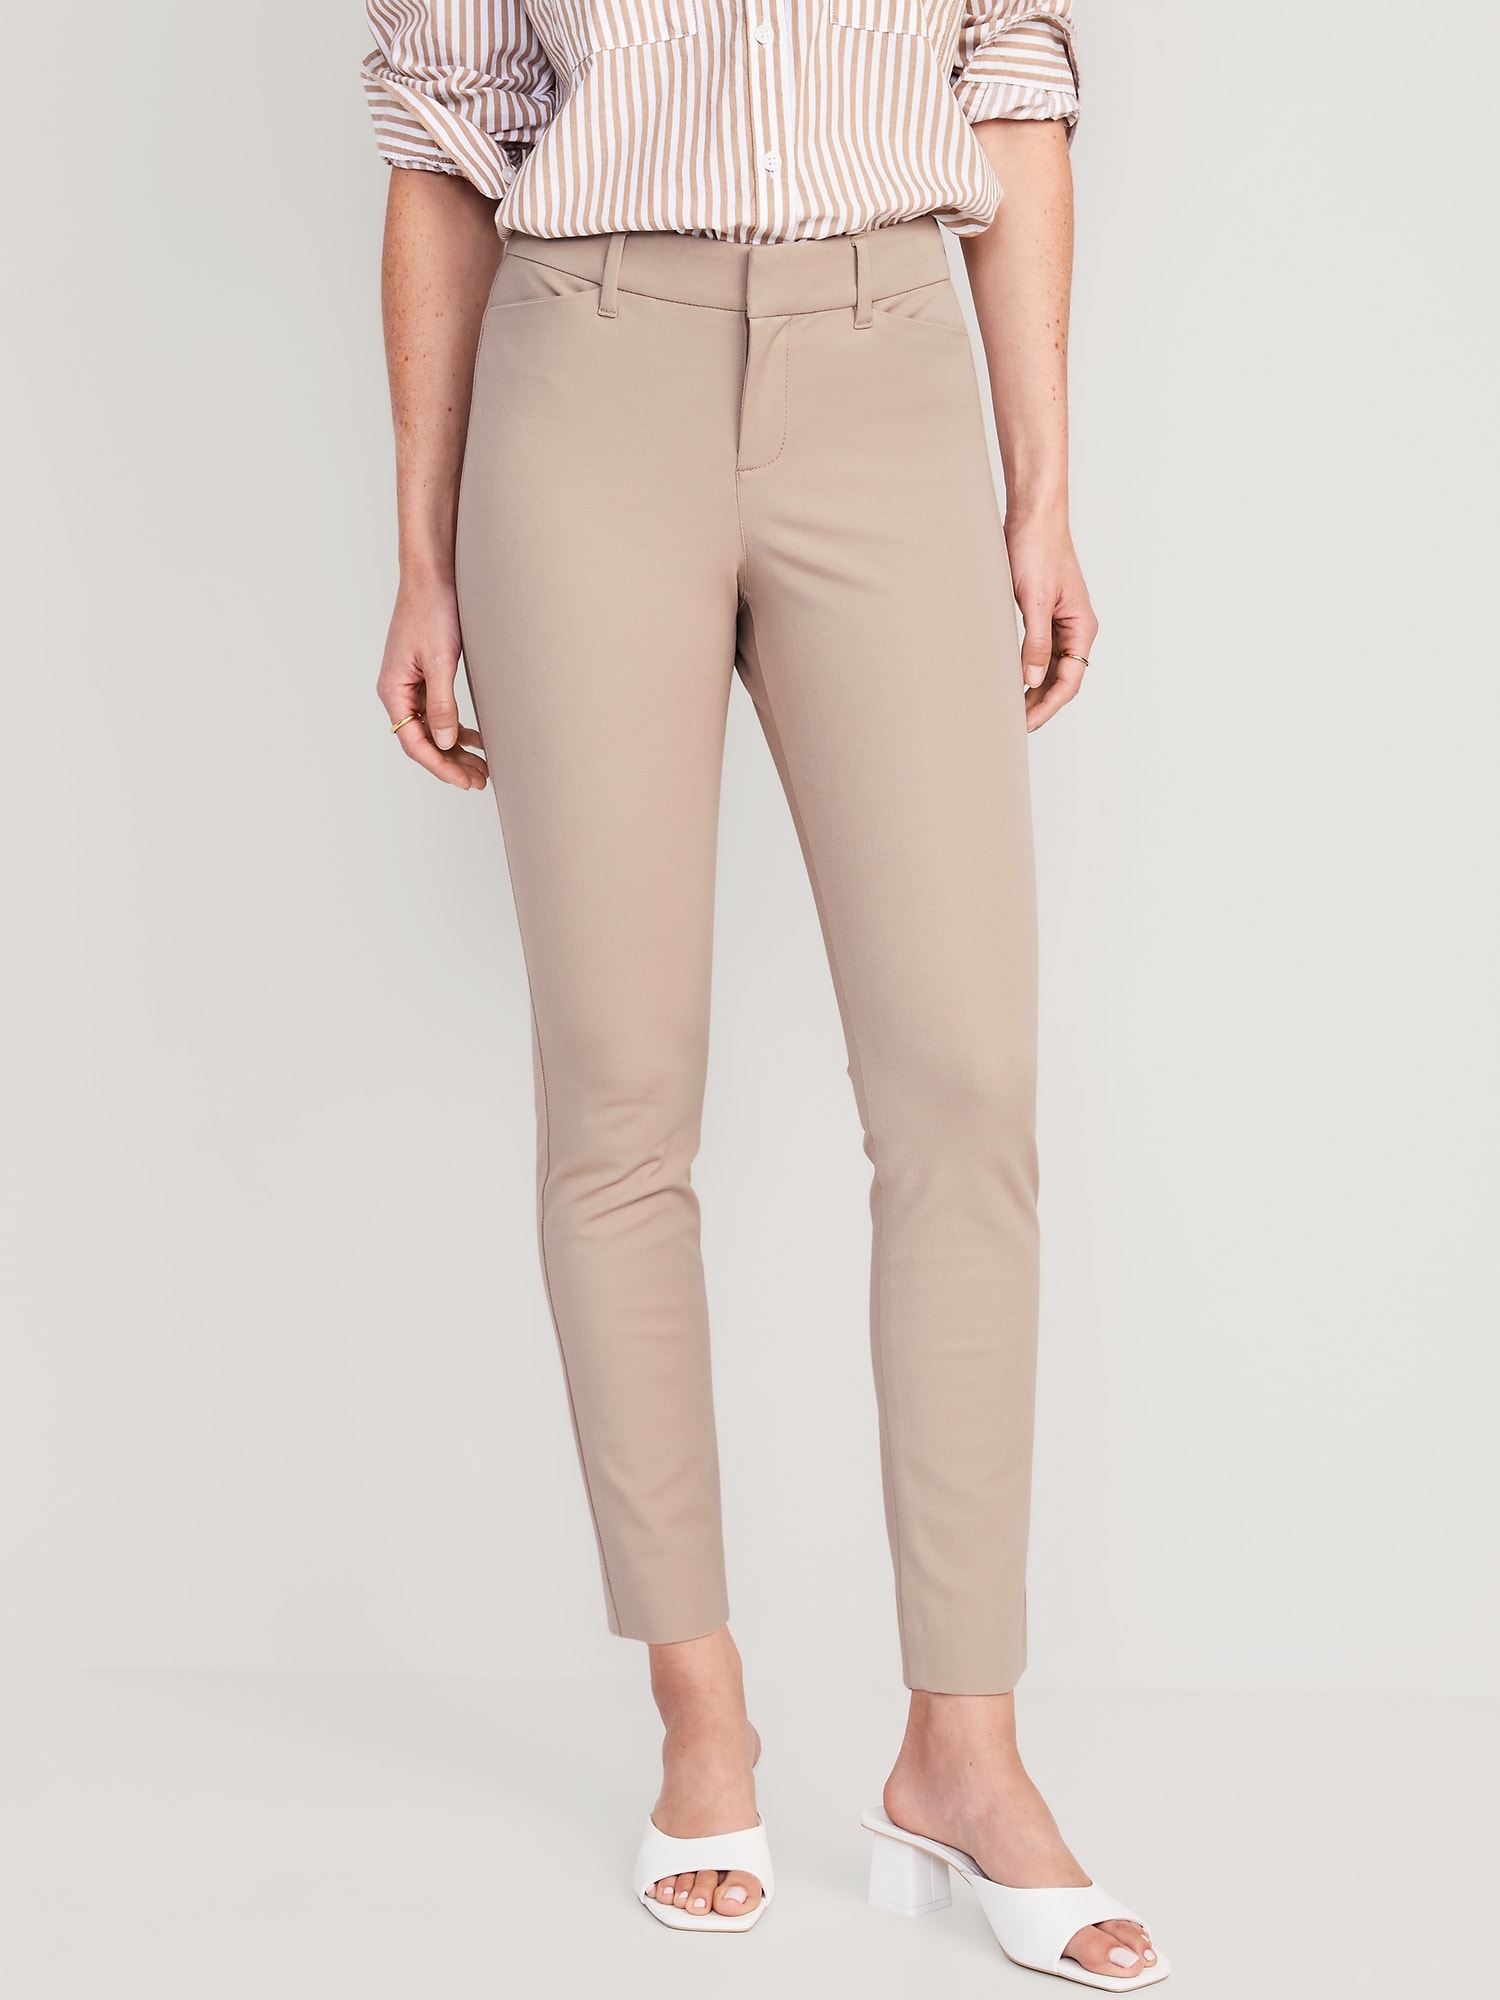 Old Navy Mid-Rise Pixie Skinny Ankle Pants for Women beige - 644793012